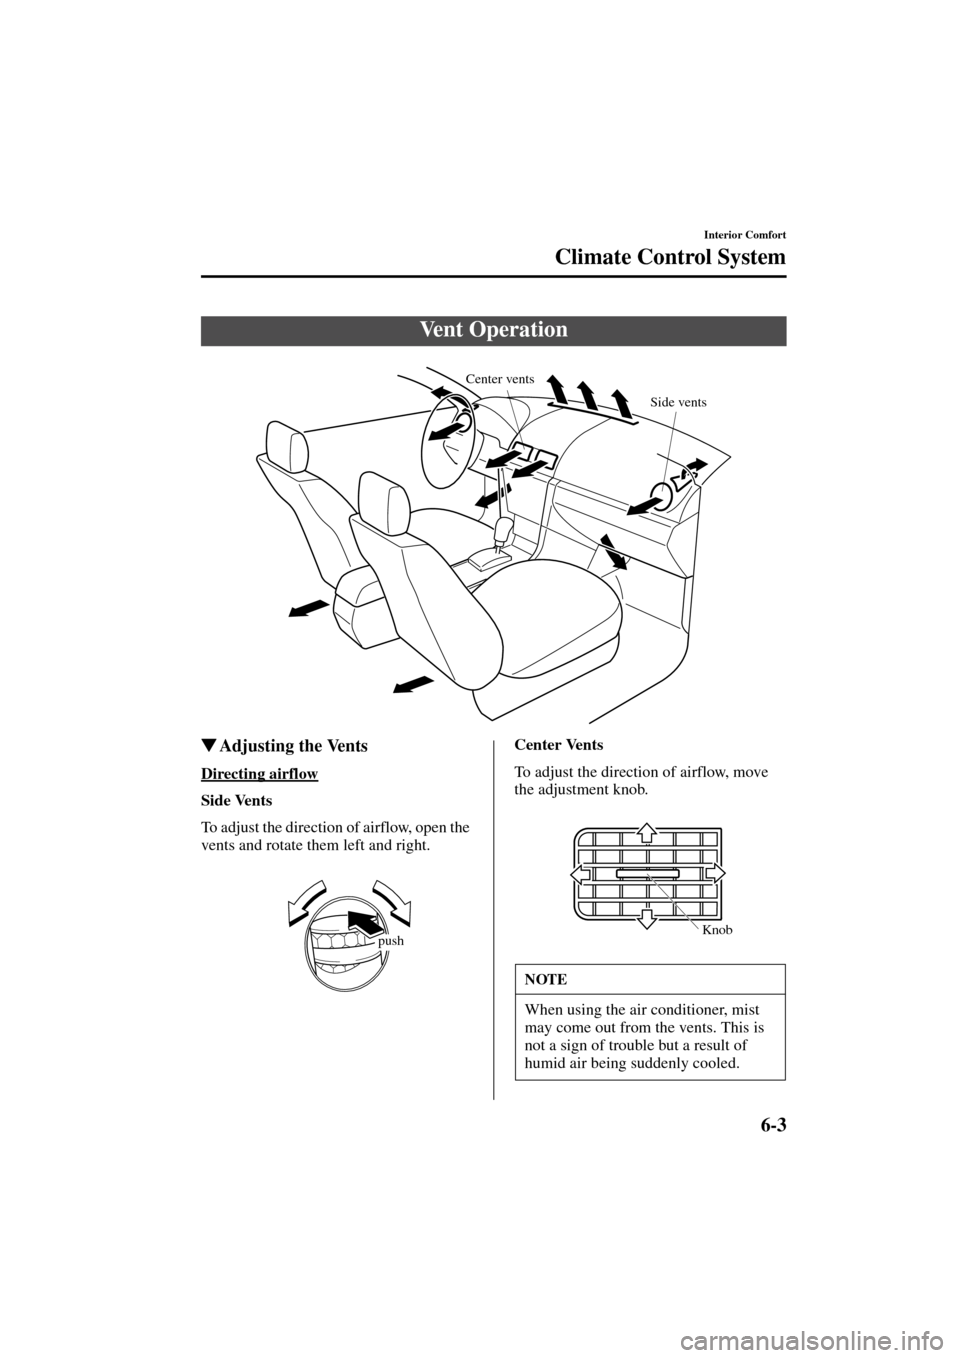 MAZDA MODEL 3 HATCHBACK 2004  Owners Manual (in English) 6-3
Interior Comfort
Climate Control System
Form No. 8S18-EA-03I
Adjusting the Vents
Directing airflow
Side Vents
To adjust the direction of airflow, open the 
vents and rotate them left and right.Ce